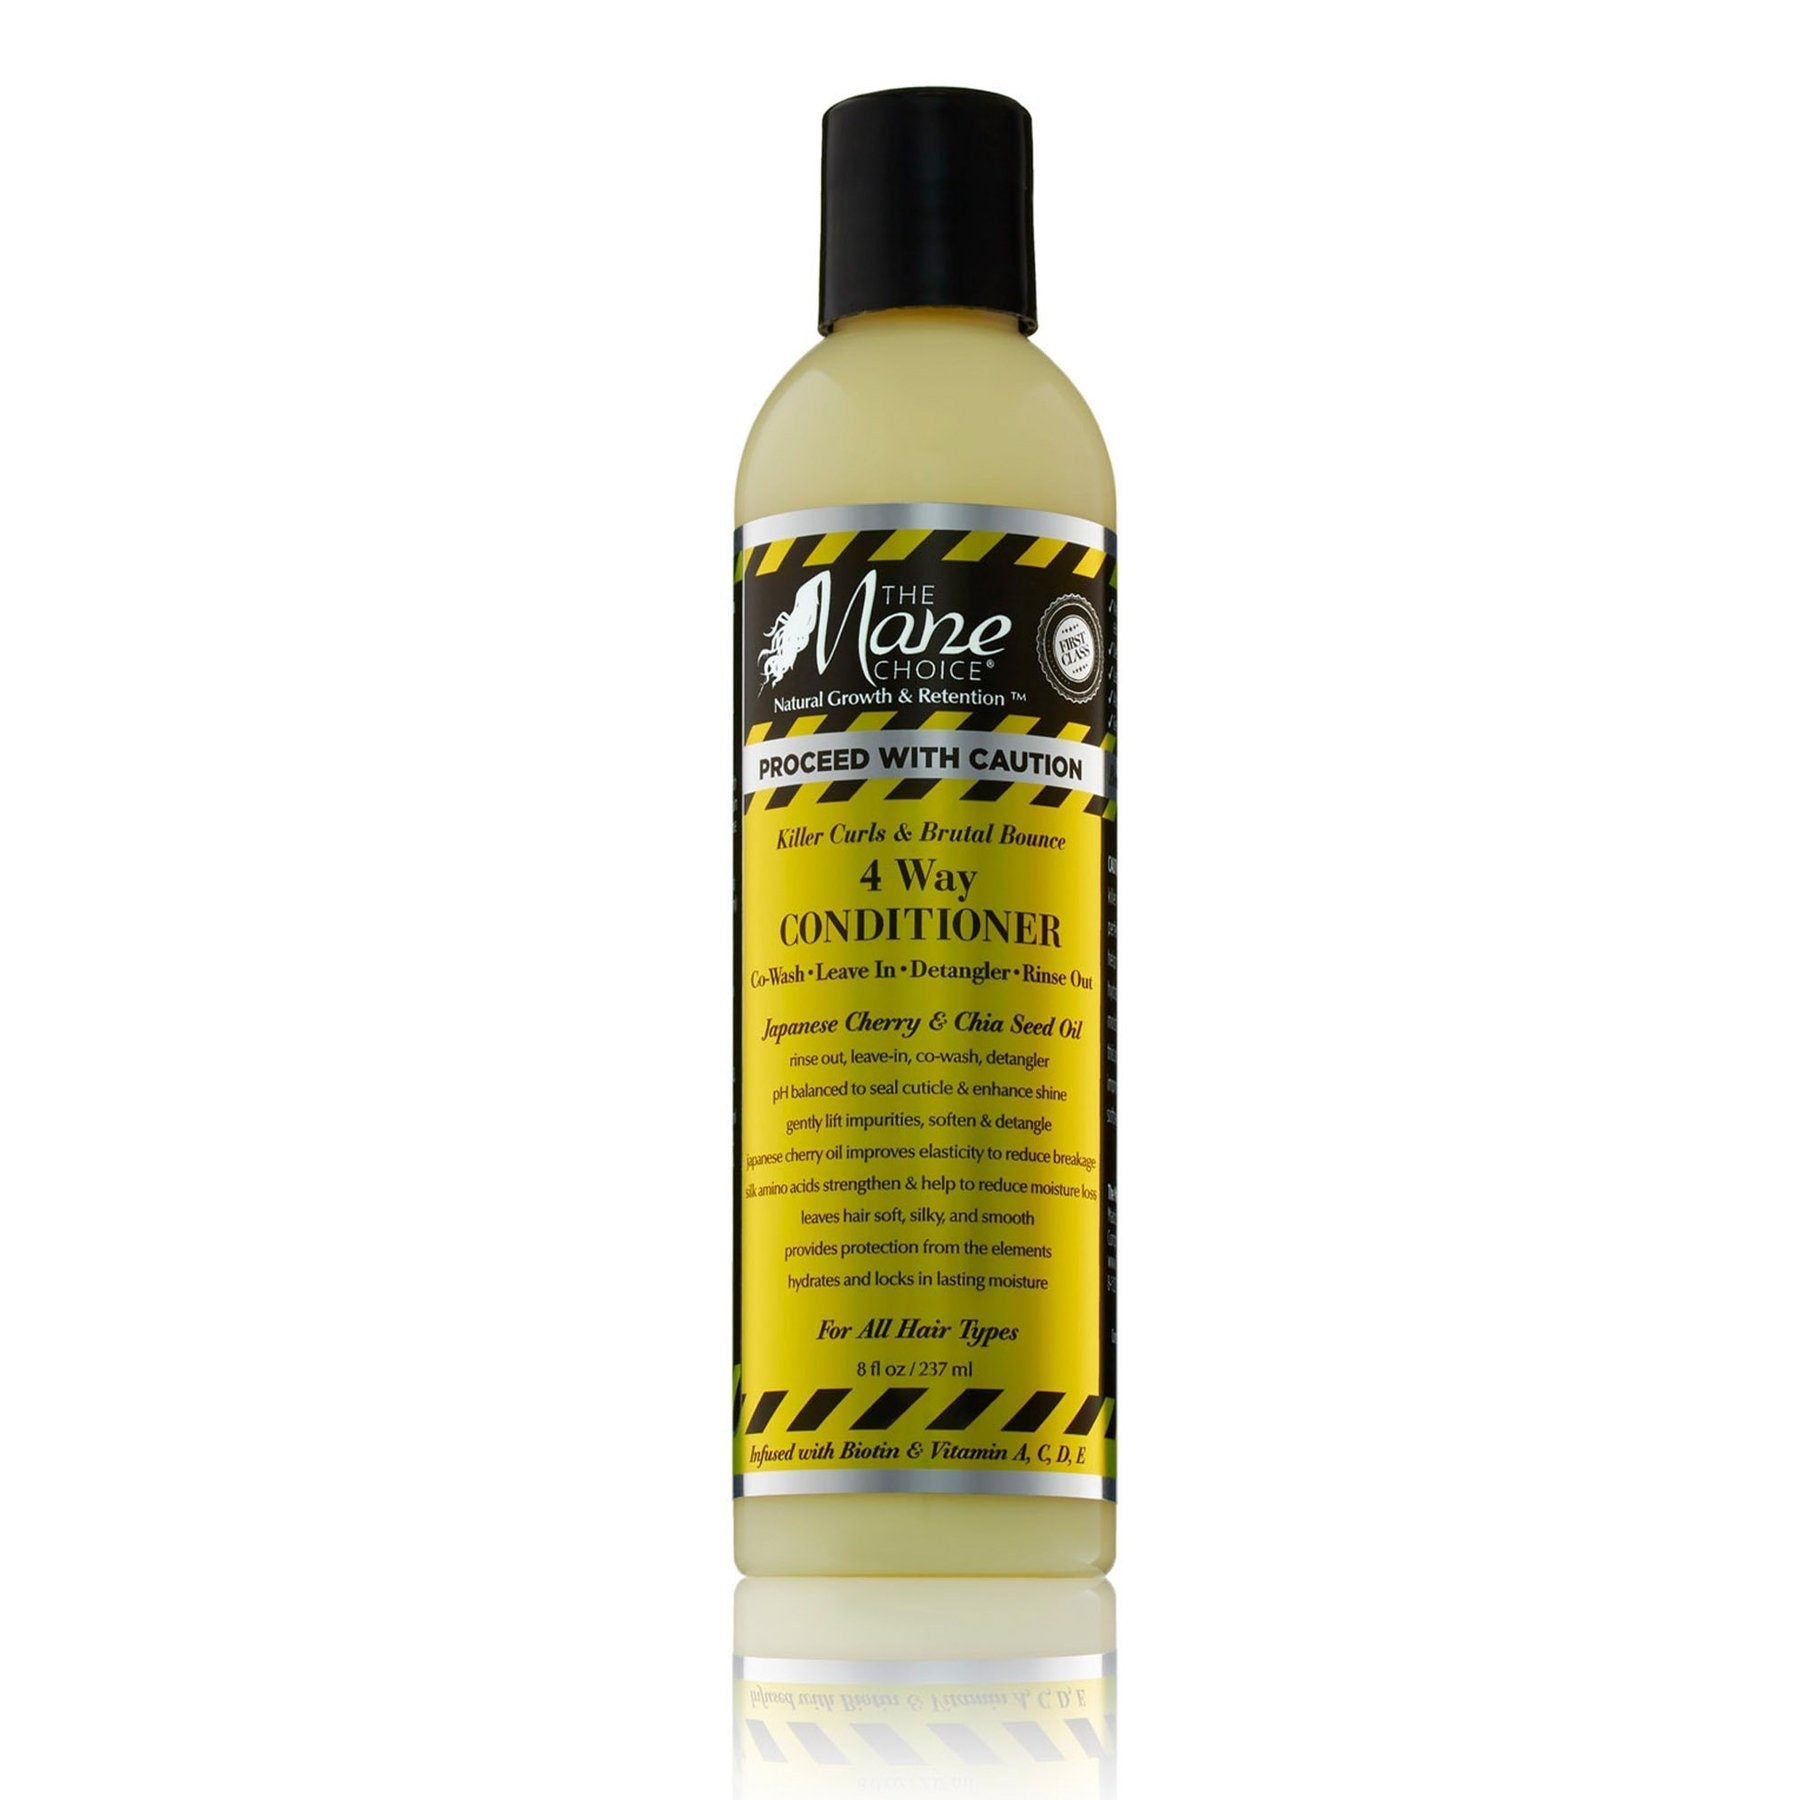 The Mane Choice Proceed With Caution 4 Way Conditioner 8oz